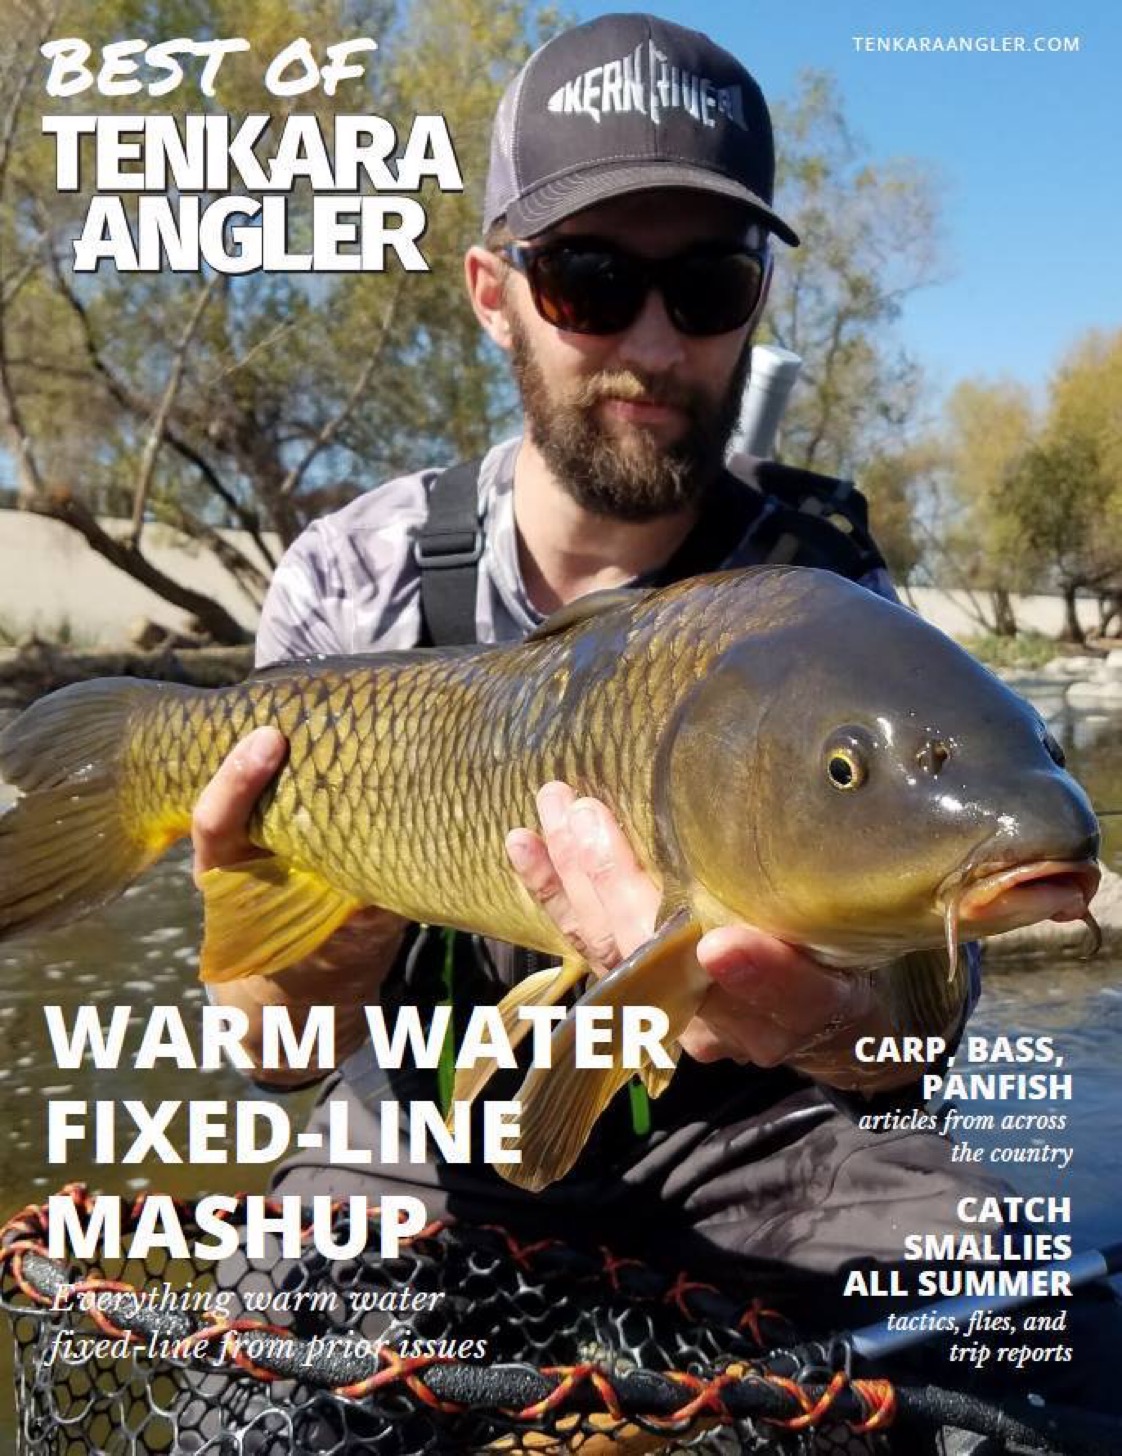 Best Of Tenkara Angler - Warm Water Mash Up — Panfish On The Fly